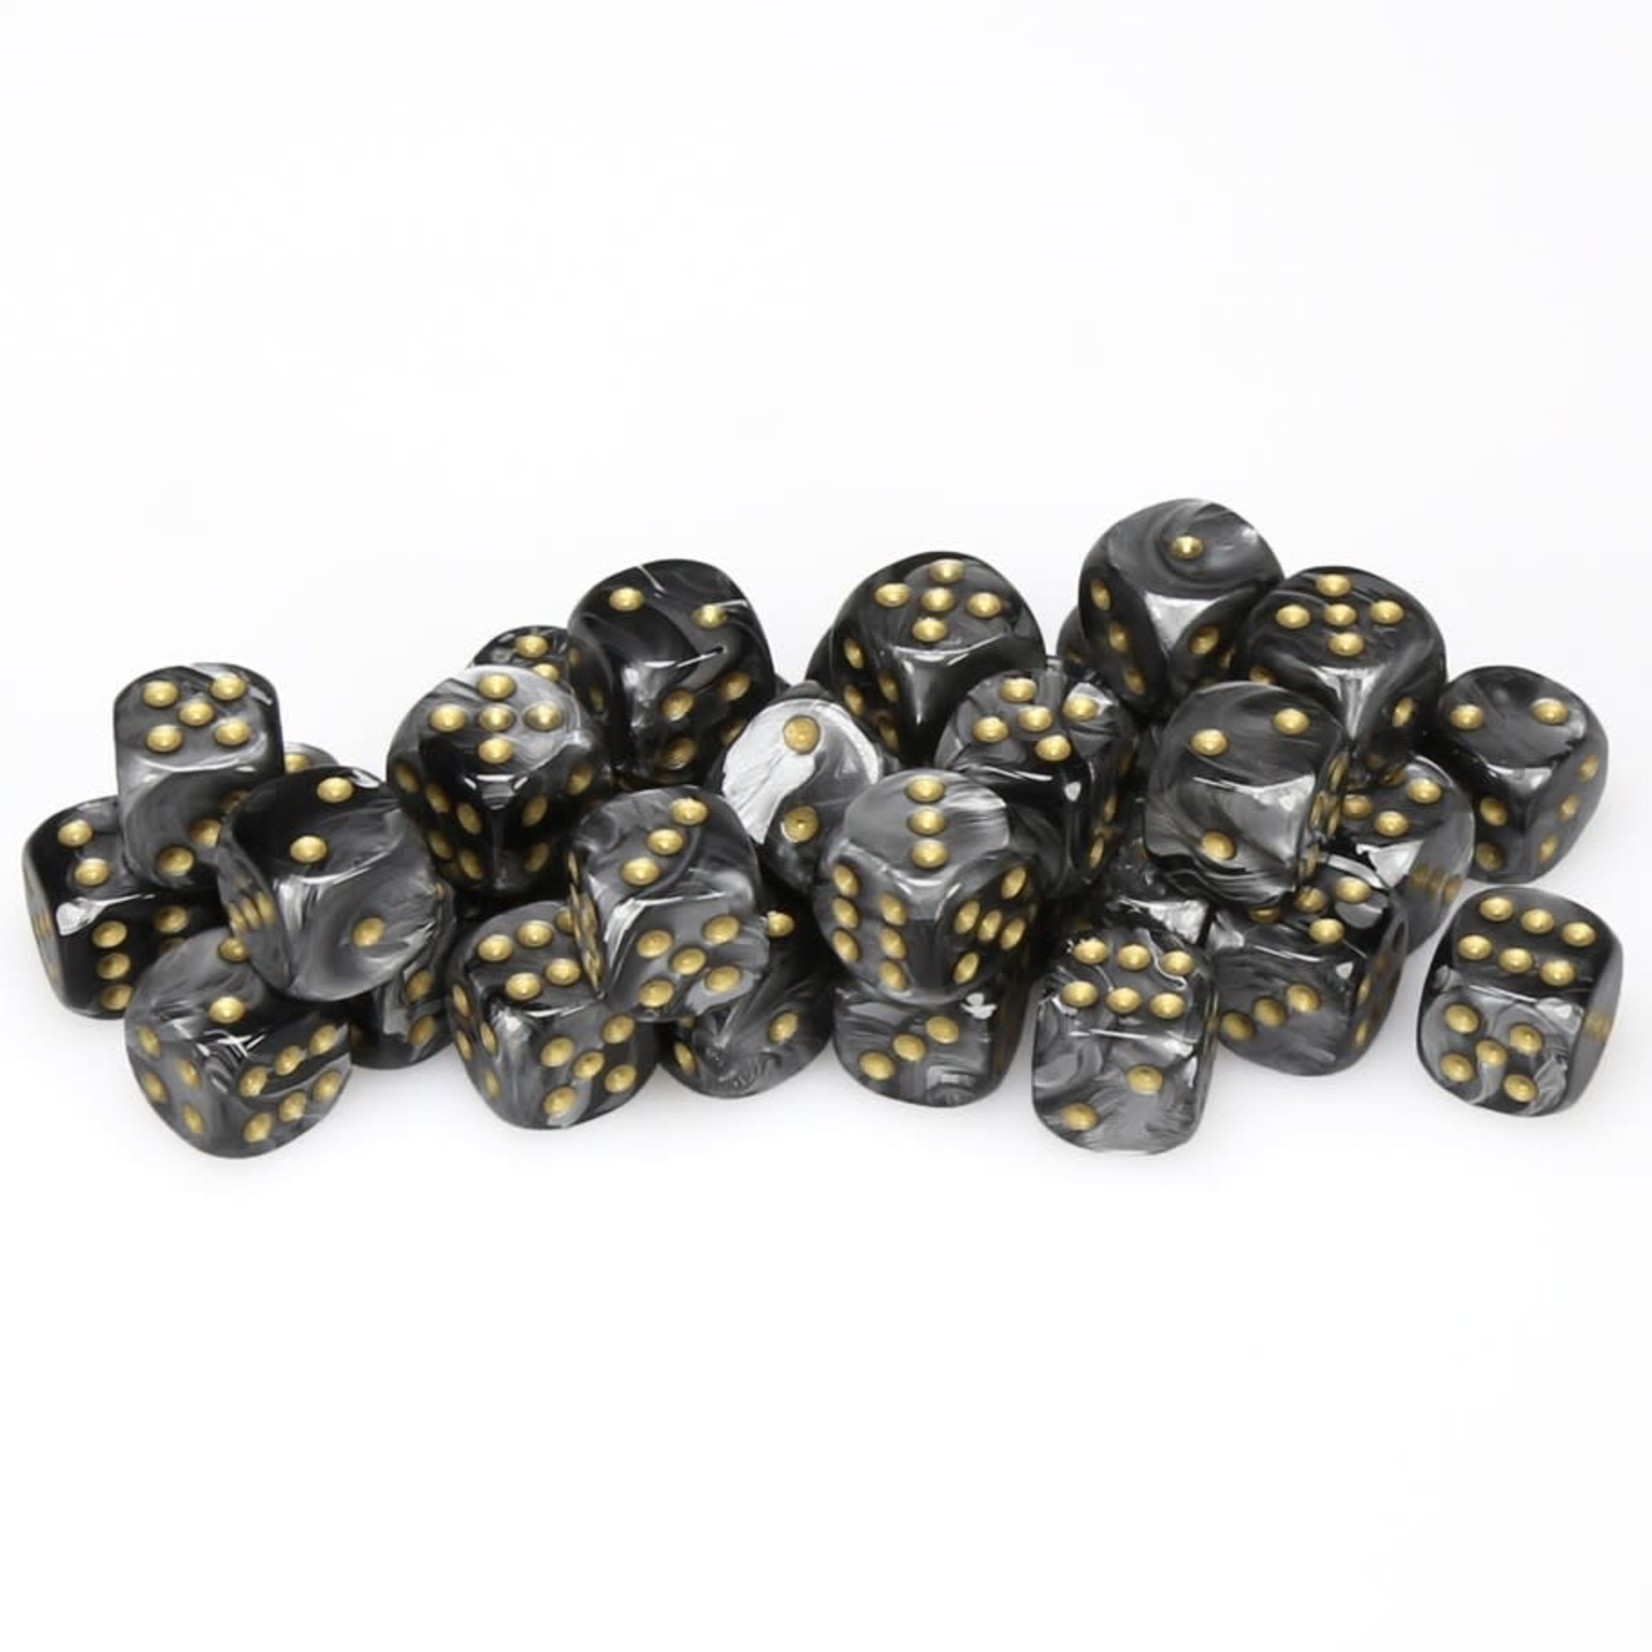 Chessex Chessex Lustrous Black with Gold 12 mm d6 36 die set